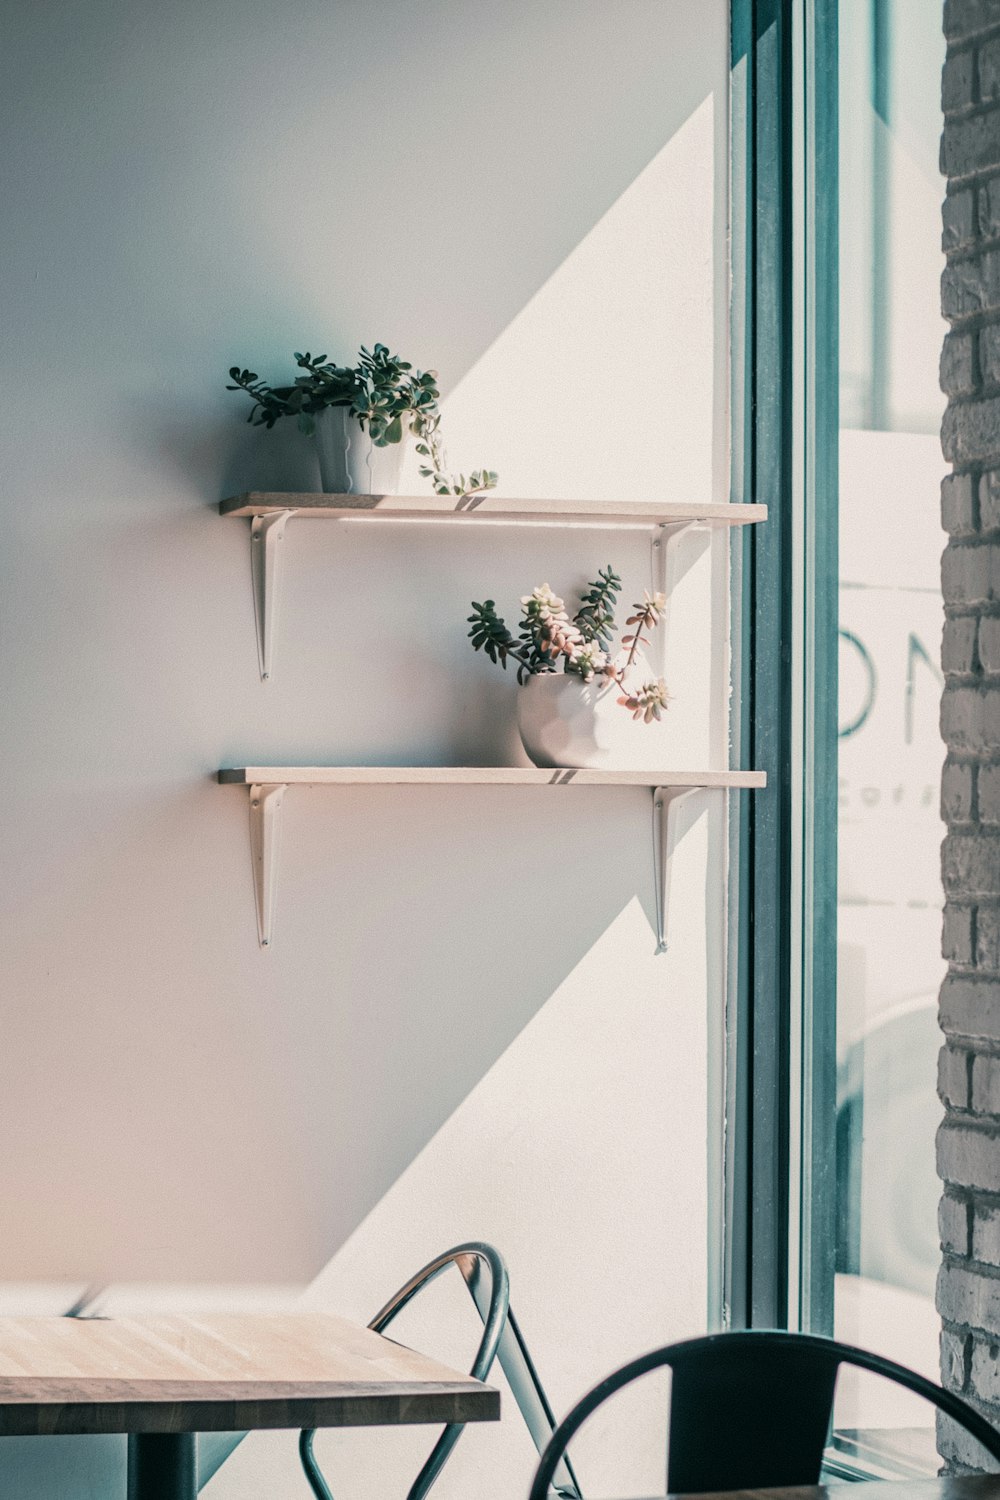 a couple of shelves that have plants on them